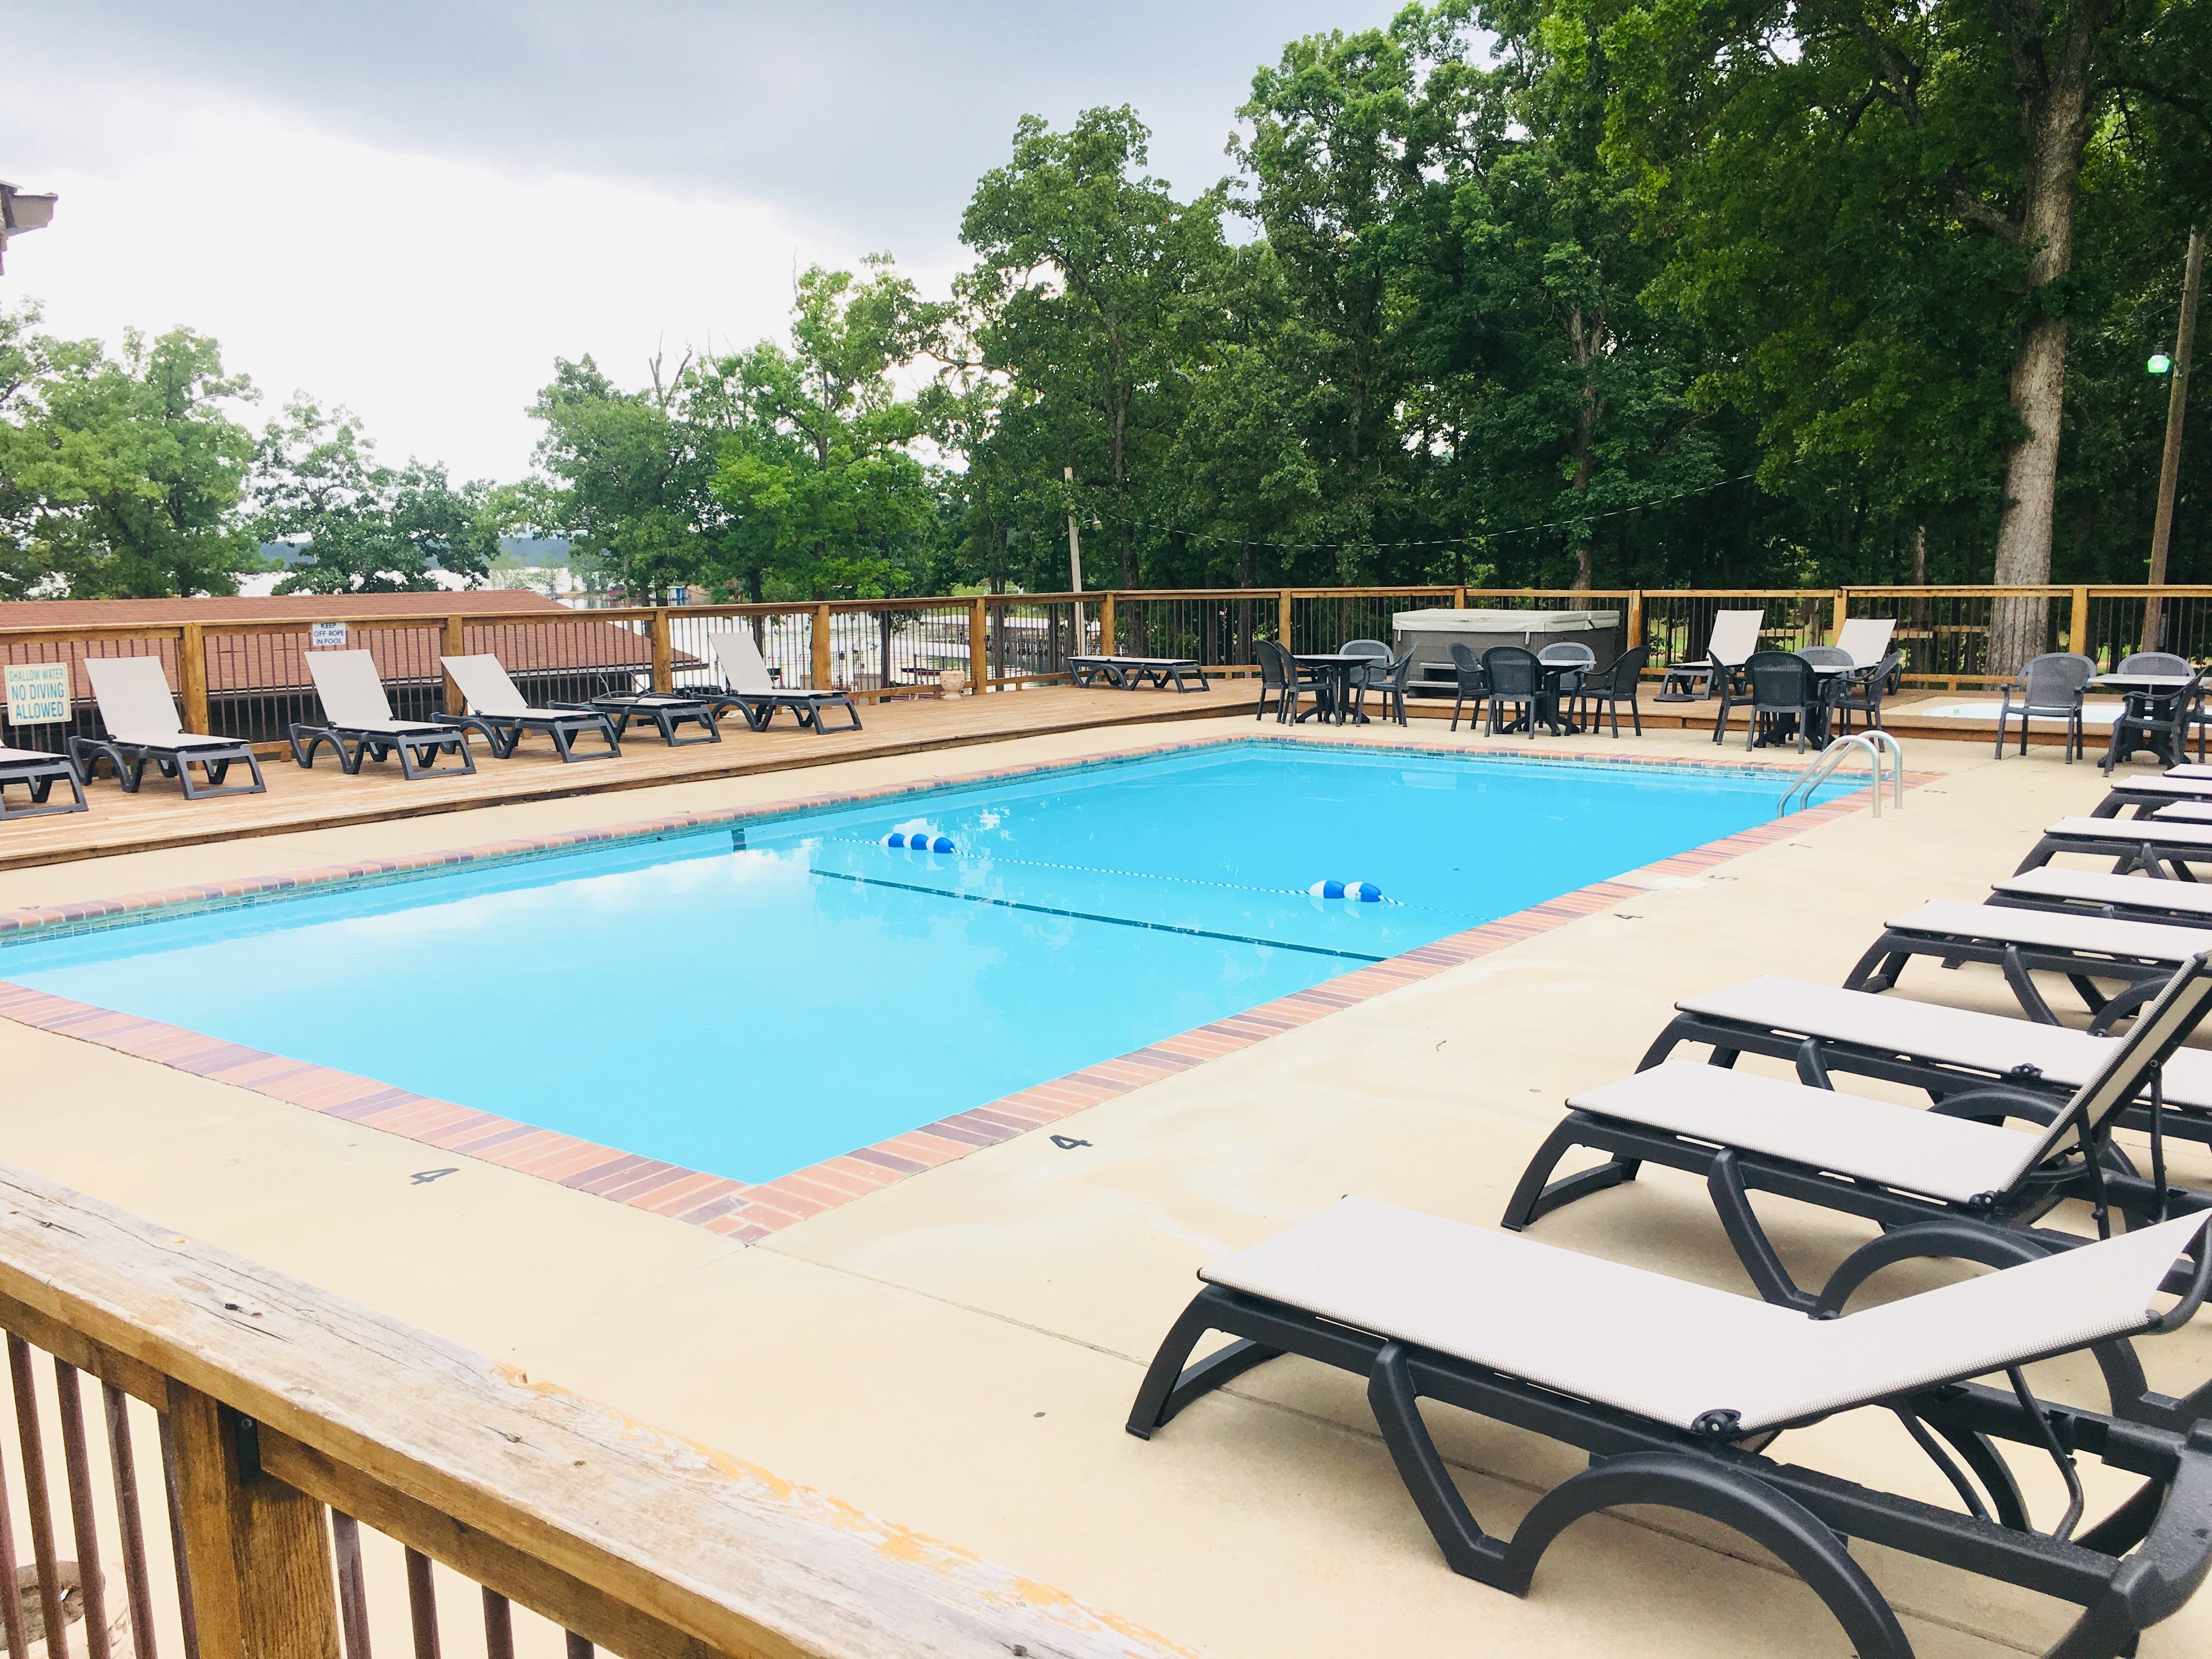 Waterfront Pool, Hot Tub & Kiddie Pool next door to the Game Room, Shuffleboard, and Grand Fire Pit